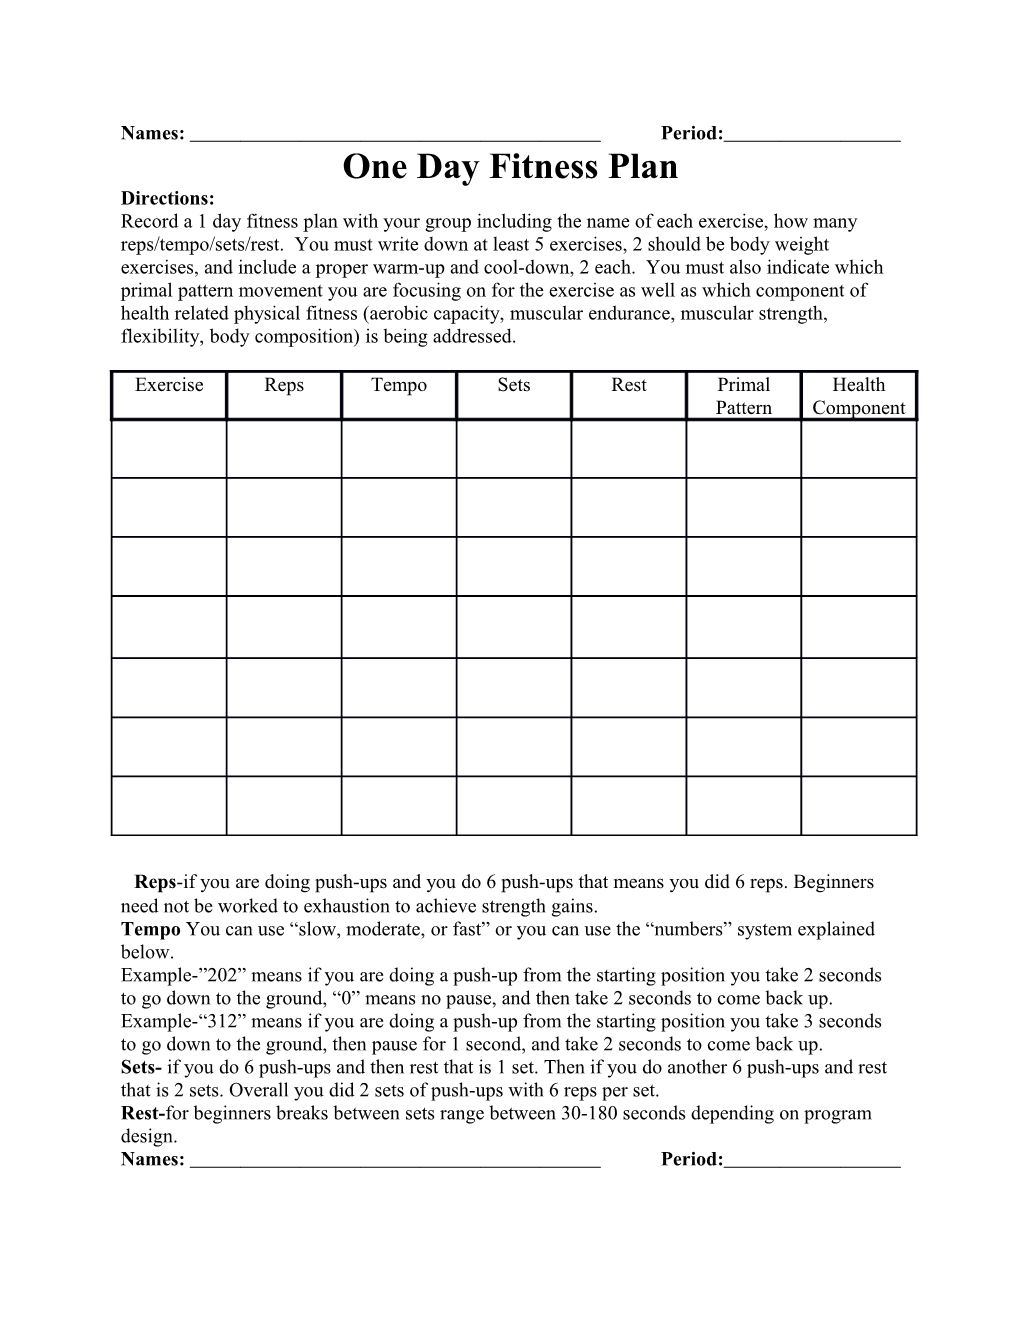 One Day Fitness Plan